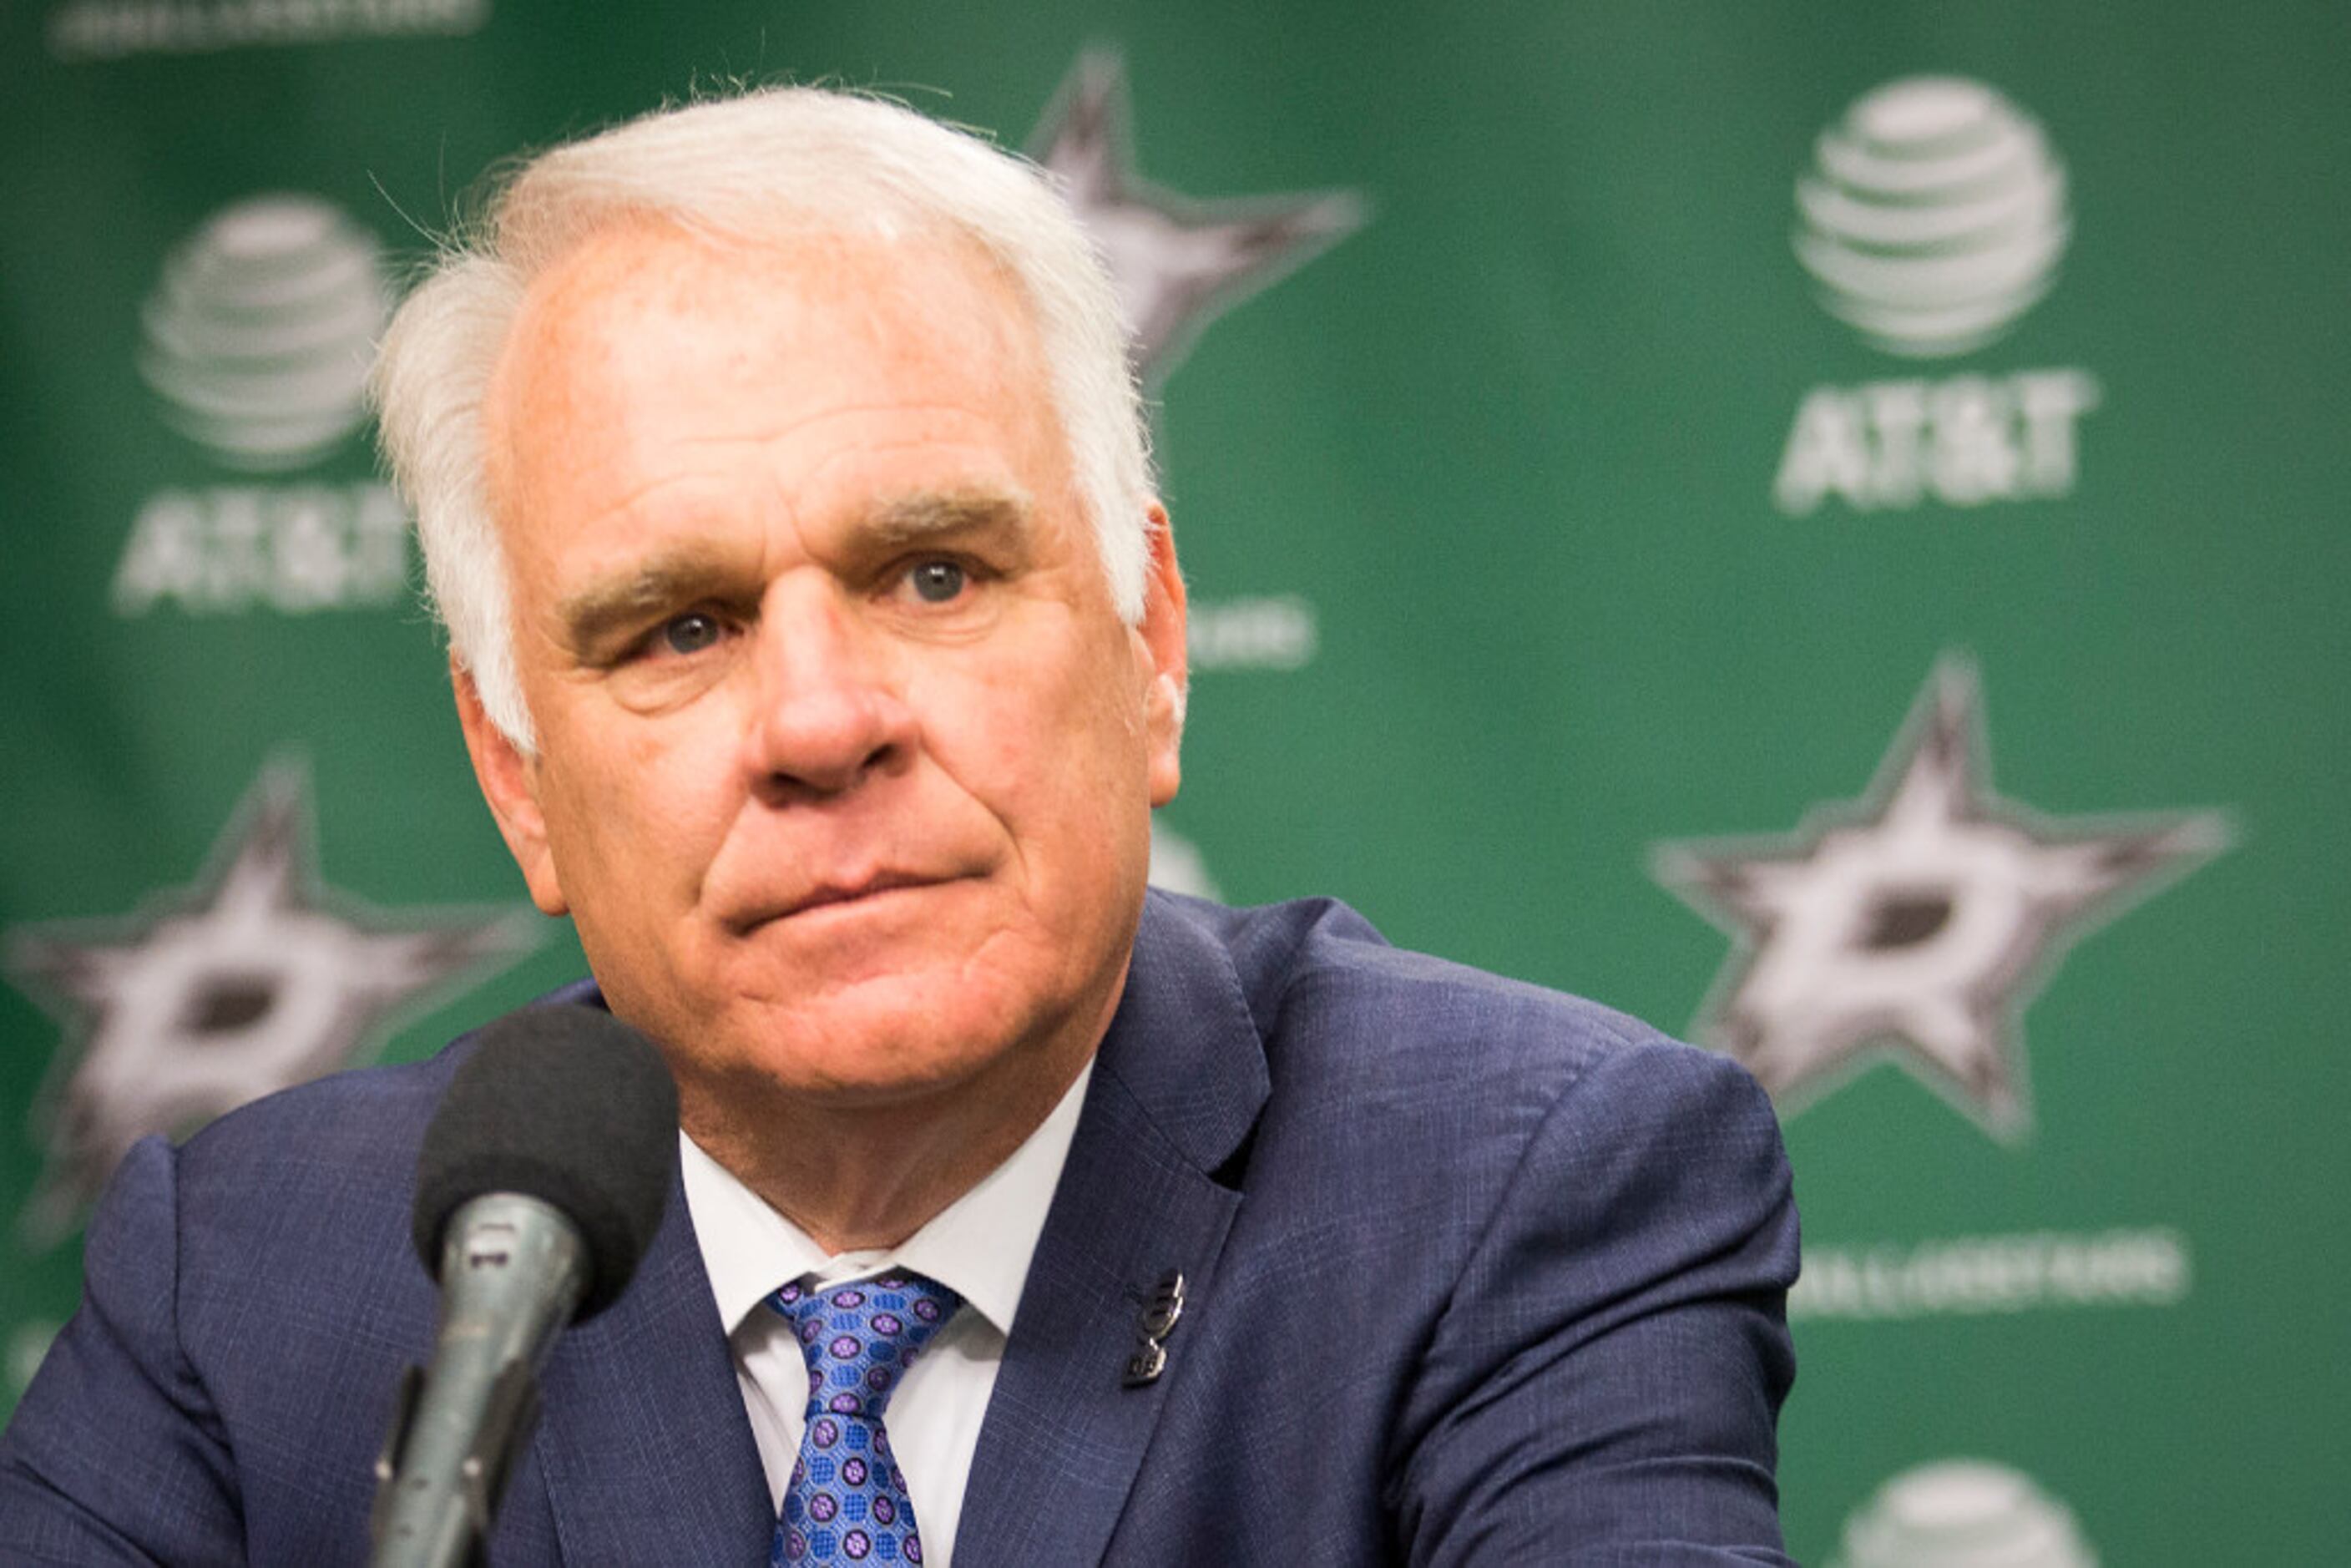 Stars announce promotion of Brad Alberts to president, CEO